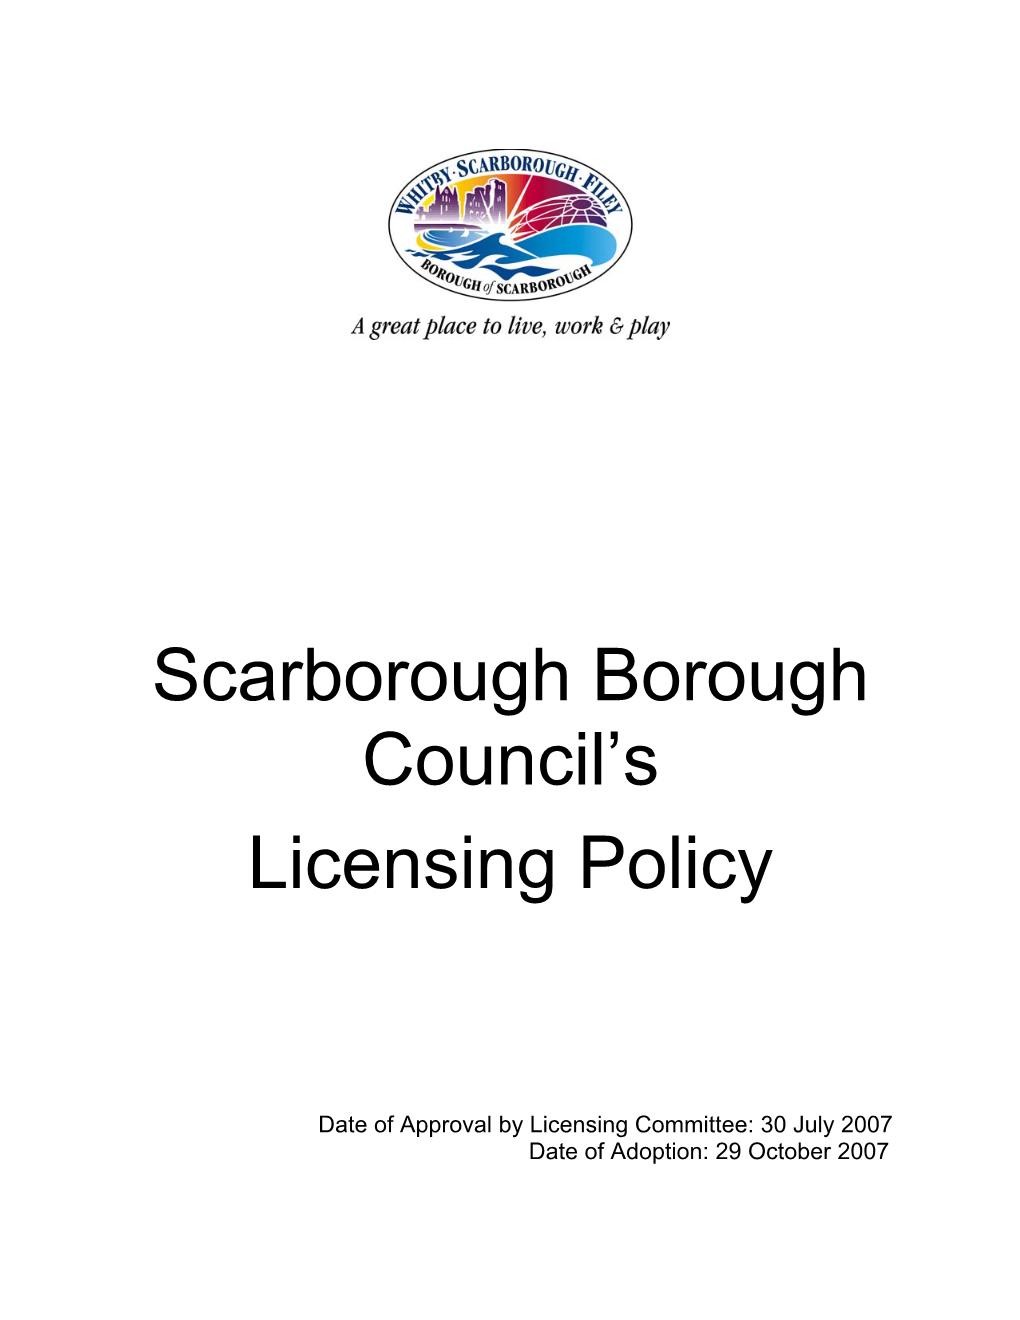 Borough of Scarborough Is Home to a Number of Popular Restaurants, Bars and Entertainment Venues